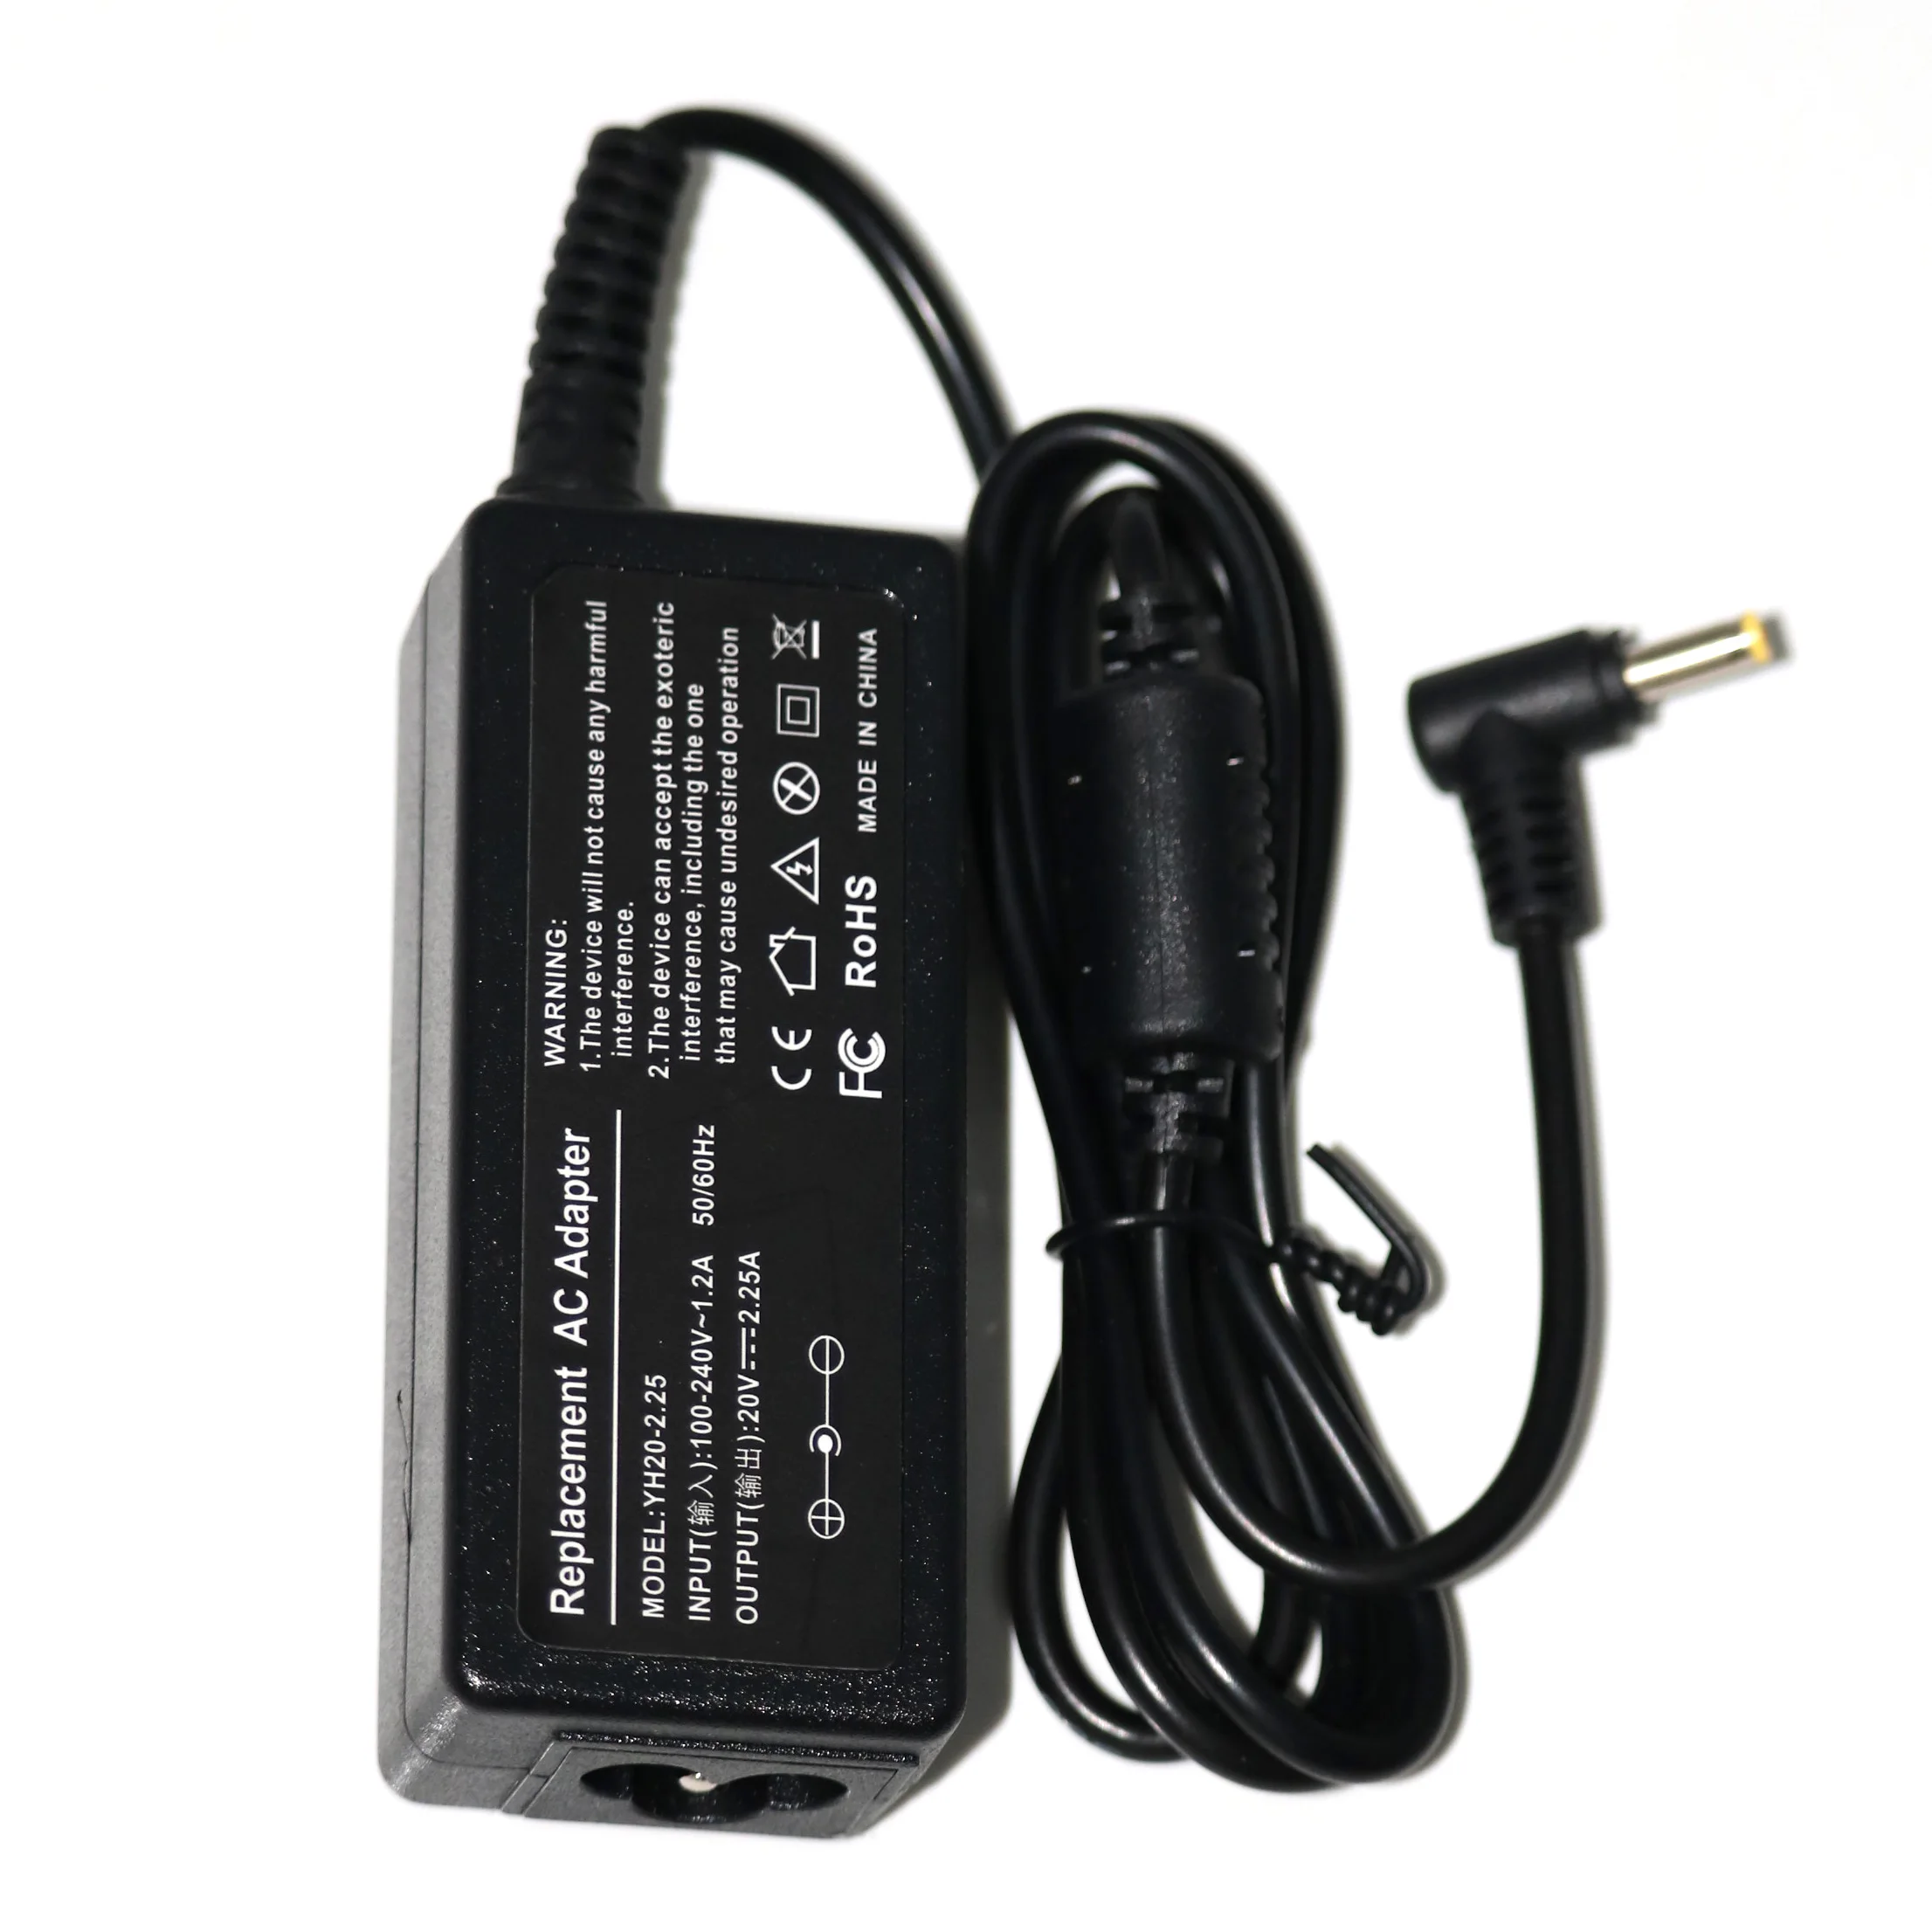 

20V 2.25A 45W 4.0*1.7MM AC Adapter Charger For Lenovo YOGA 310 510 520 710 MIIX5 7000 Air 12 13 ideapad 320 100 110 N22 N42